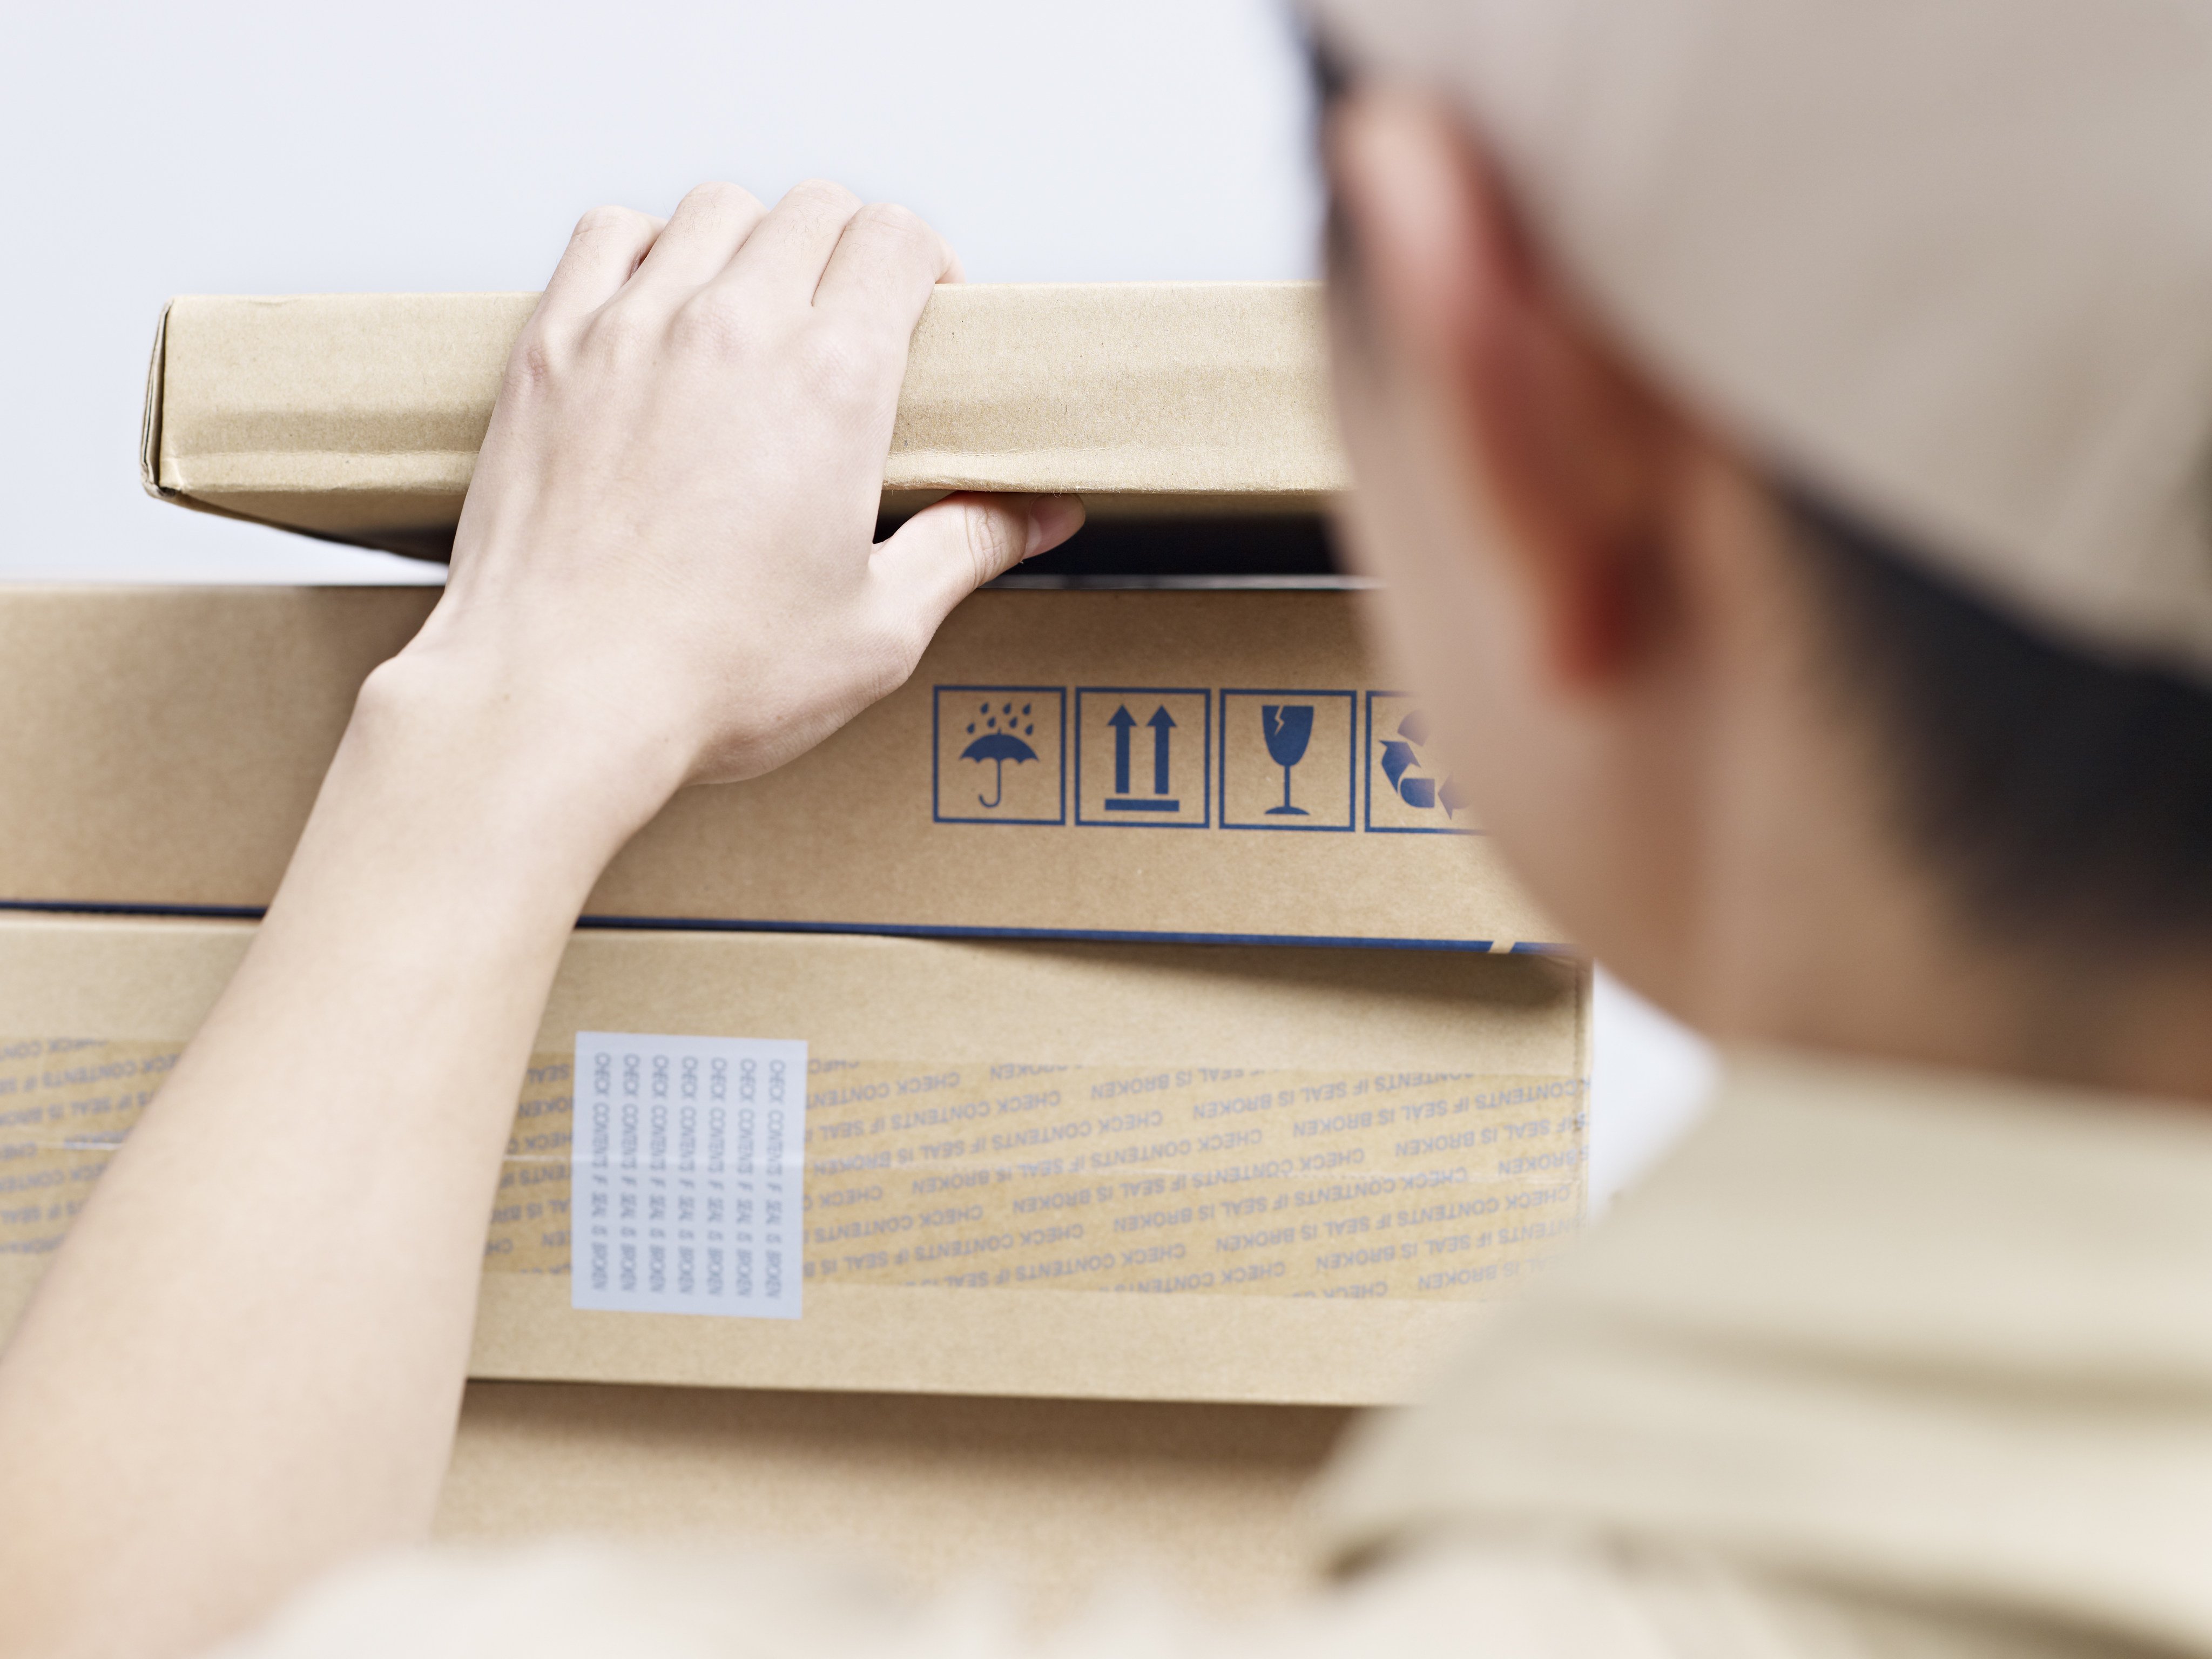 In Jiangsu province, a regulation that took effect on April 15 states that courier companies and their workers must report “clues about national security violations and crimes” they discover during their work. Photo: Shutterstock Images